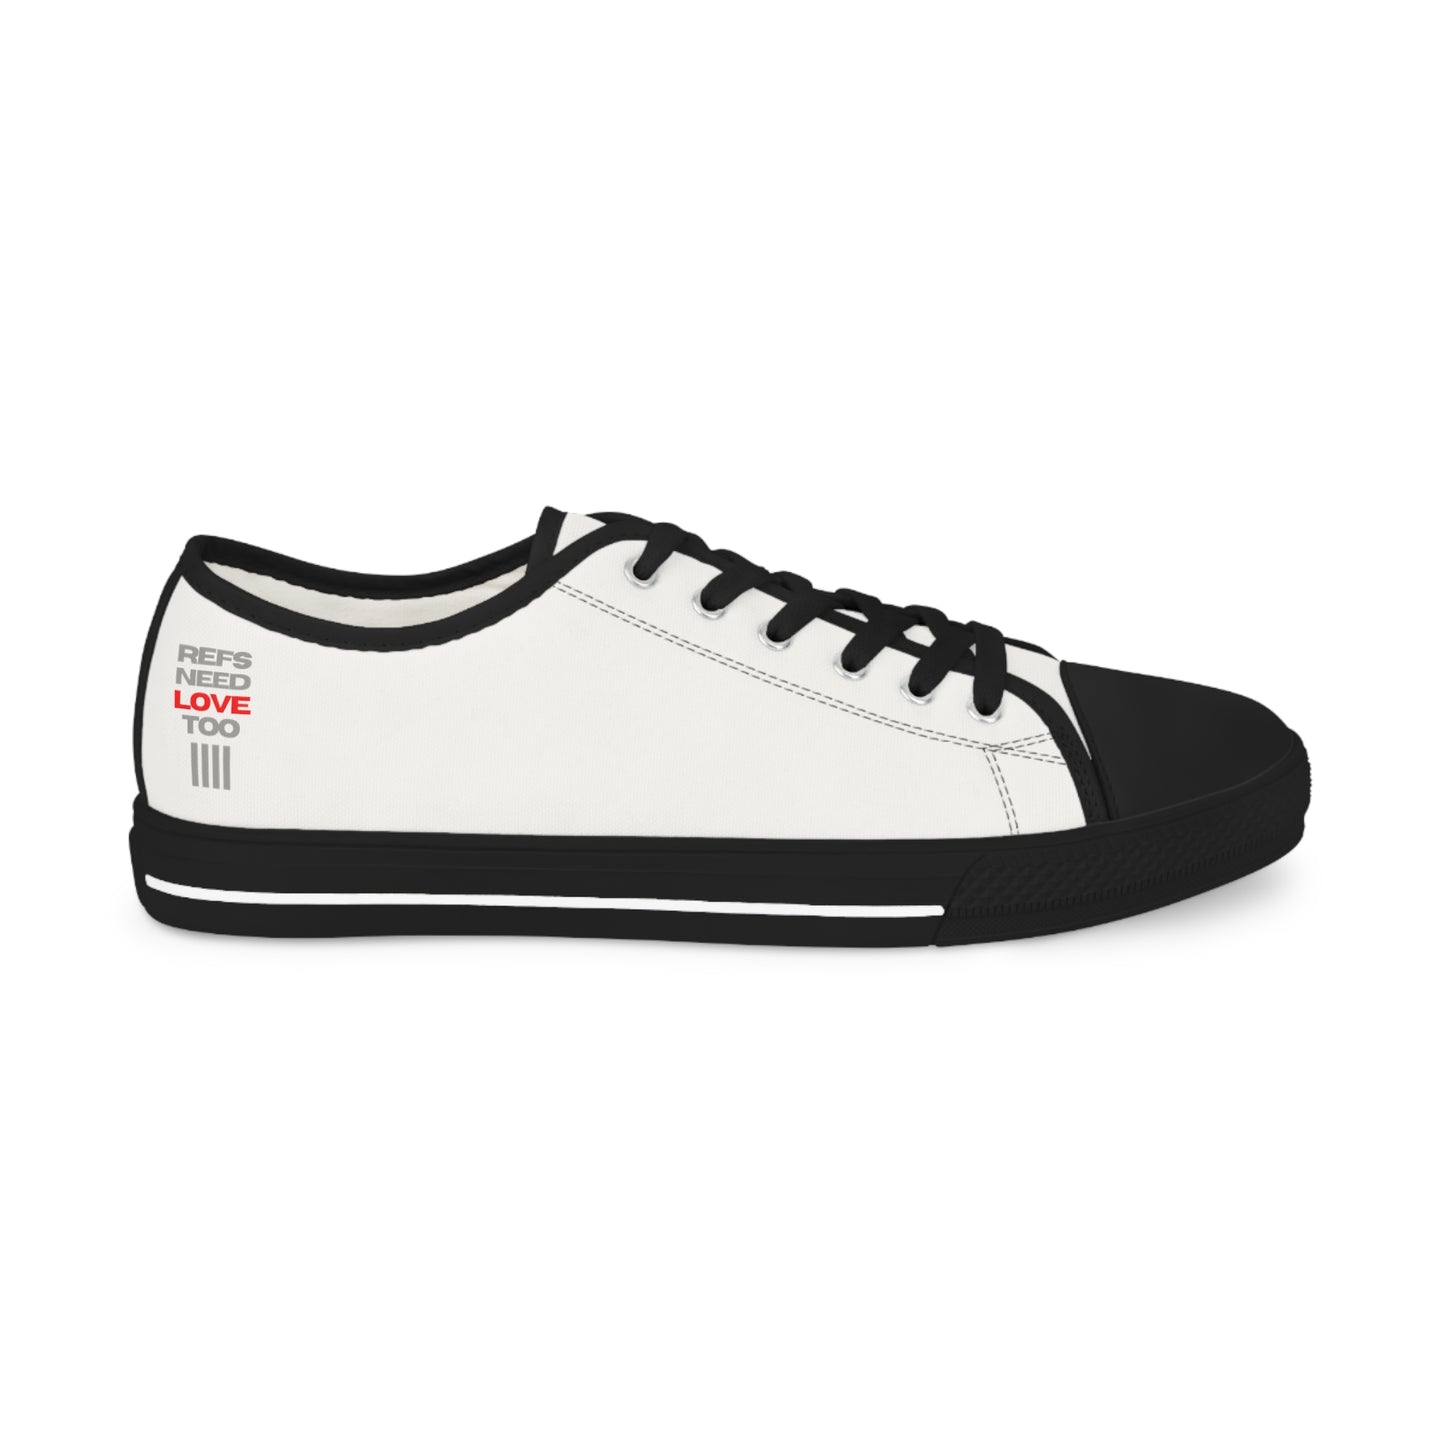 Refs Need Love Too Men's Low Top Sneakers | Amazing gift for Refs | Minimalist Design | For sports officials | Great Christmas Gift for Referees | US Sizes 5-14 | White or White/Black